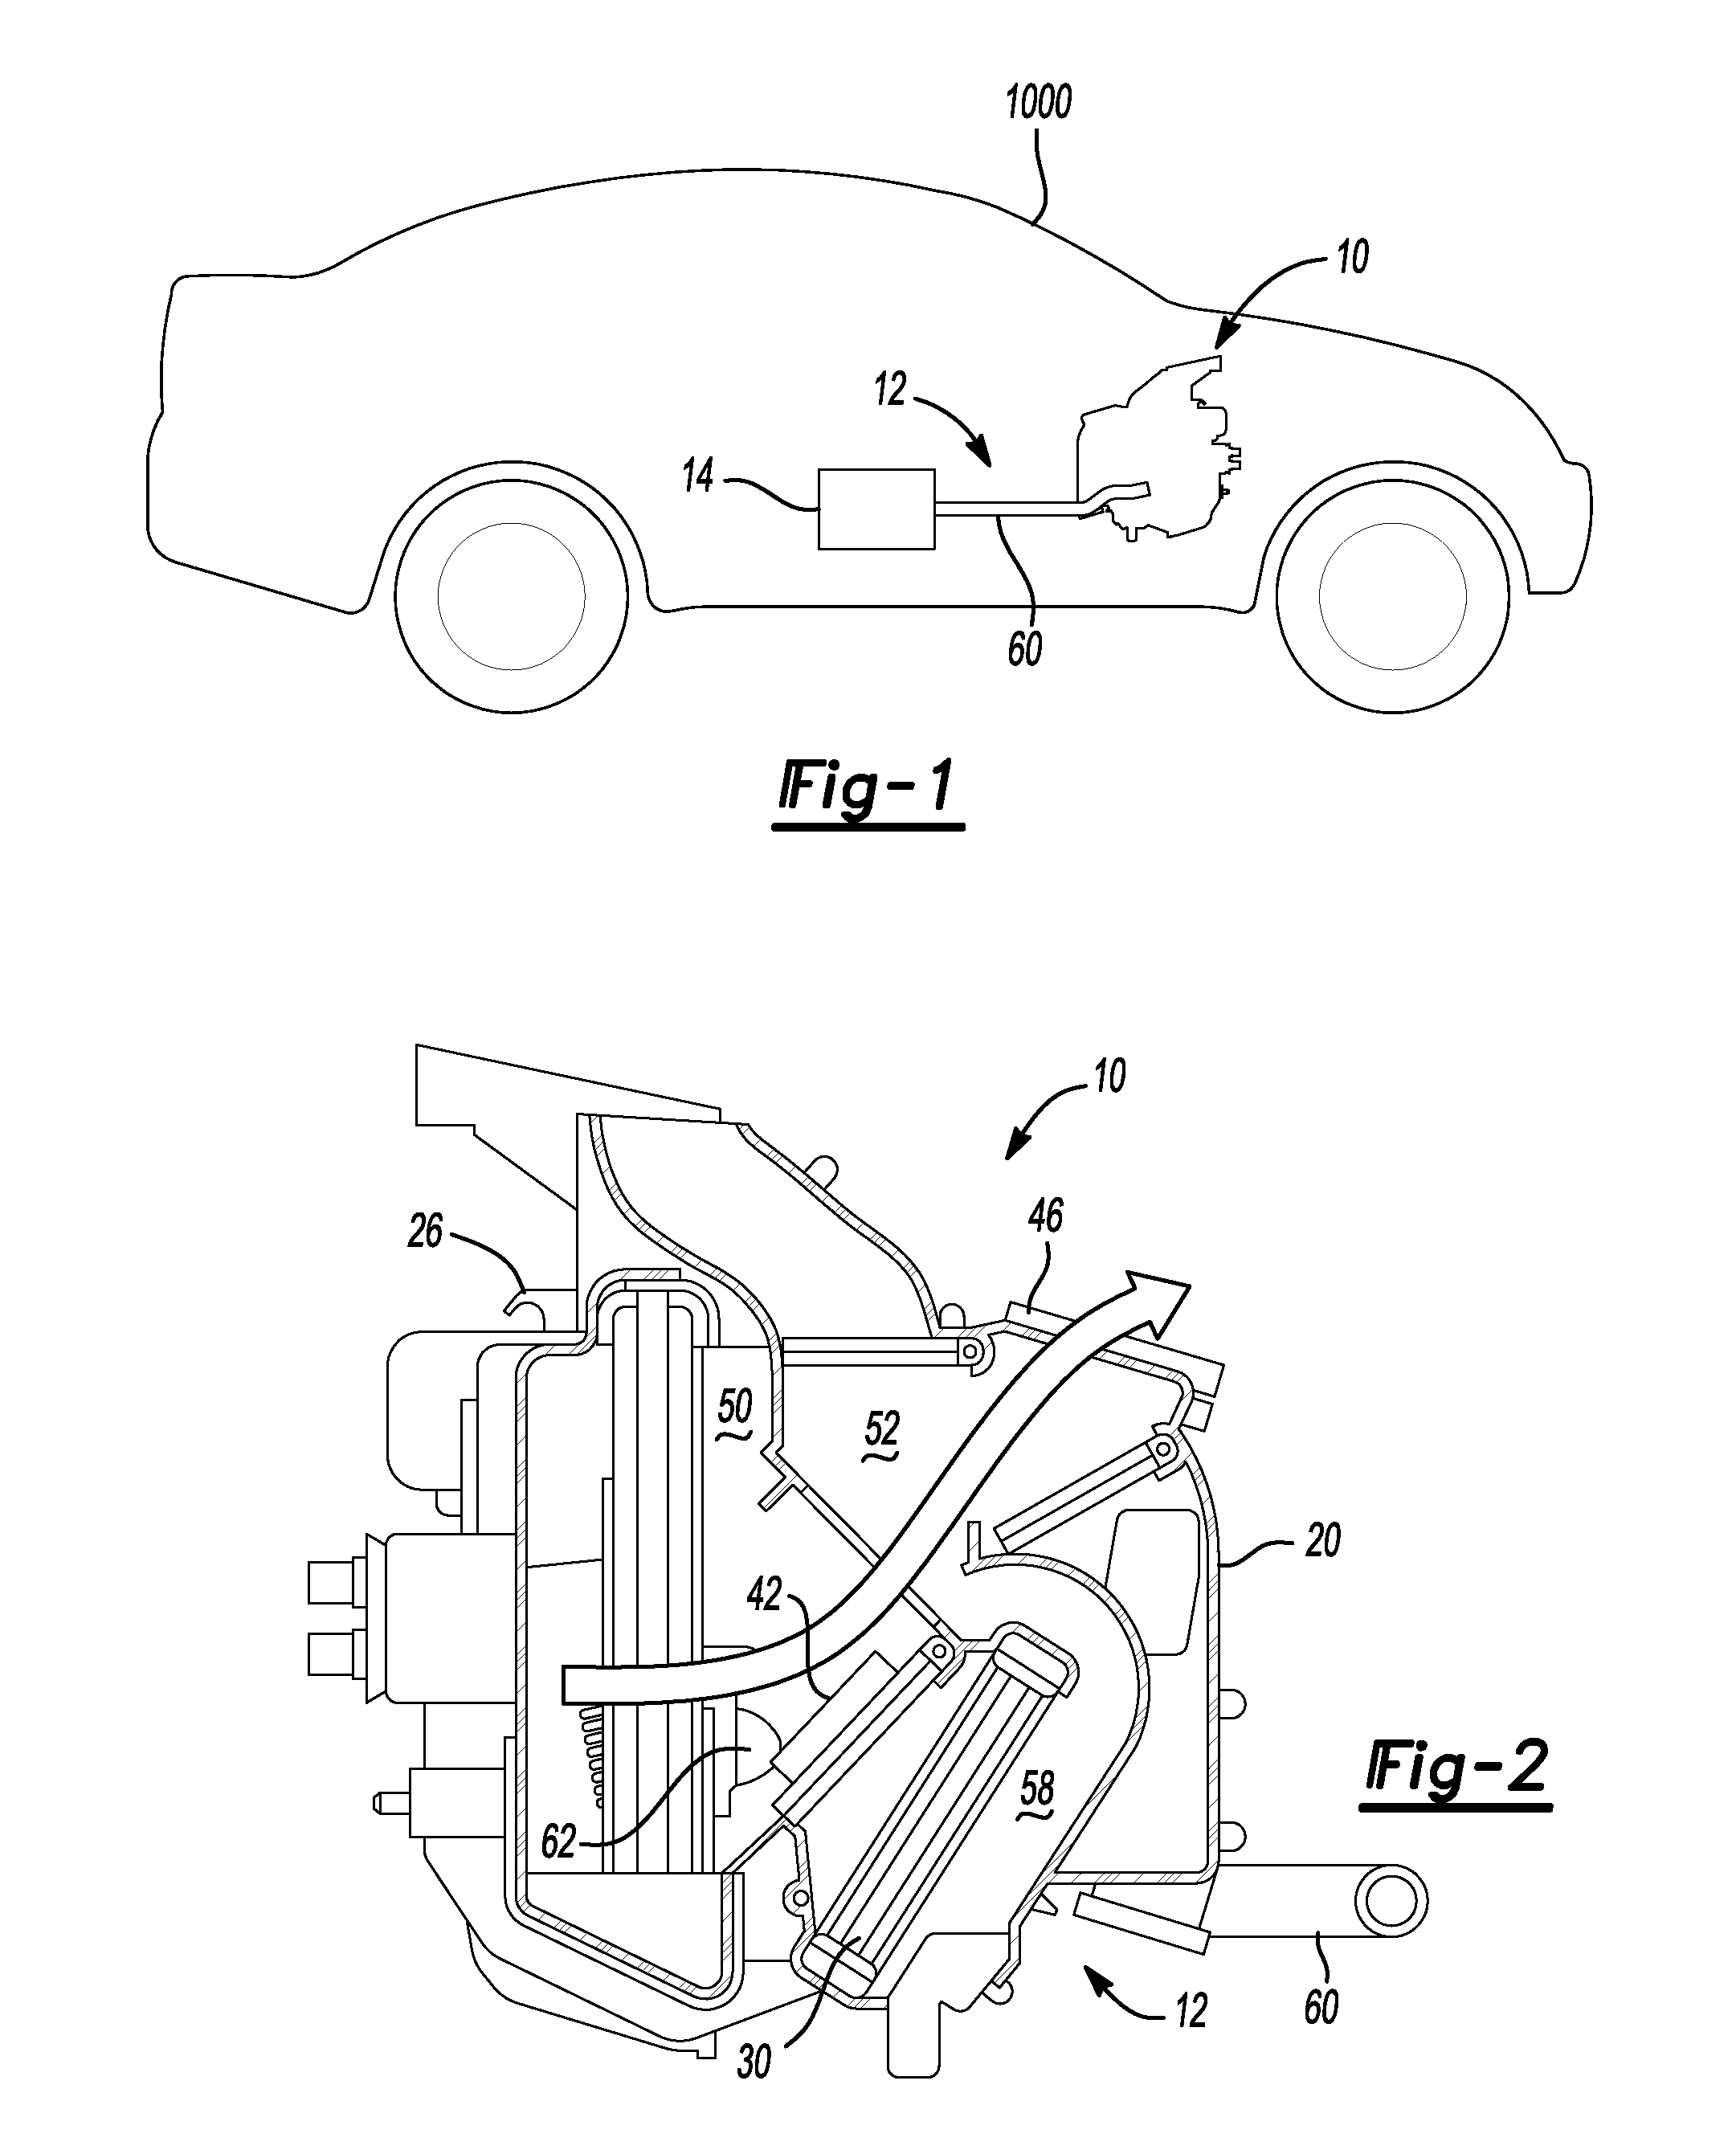 Heating, ventilating and air-conditioning apparatus